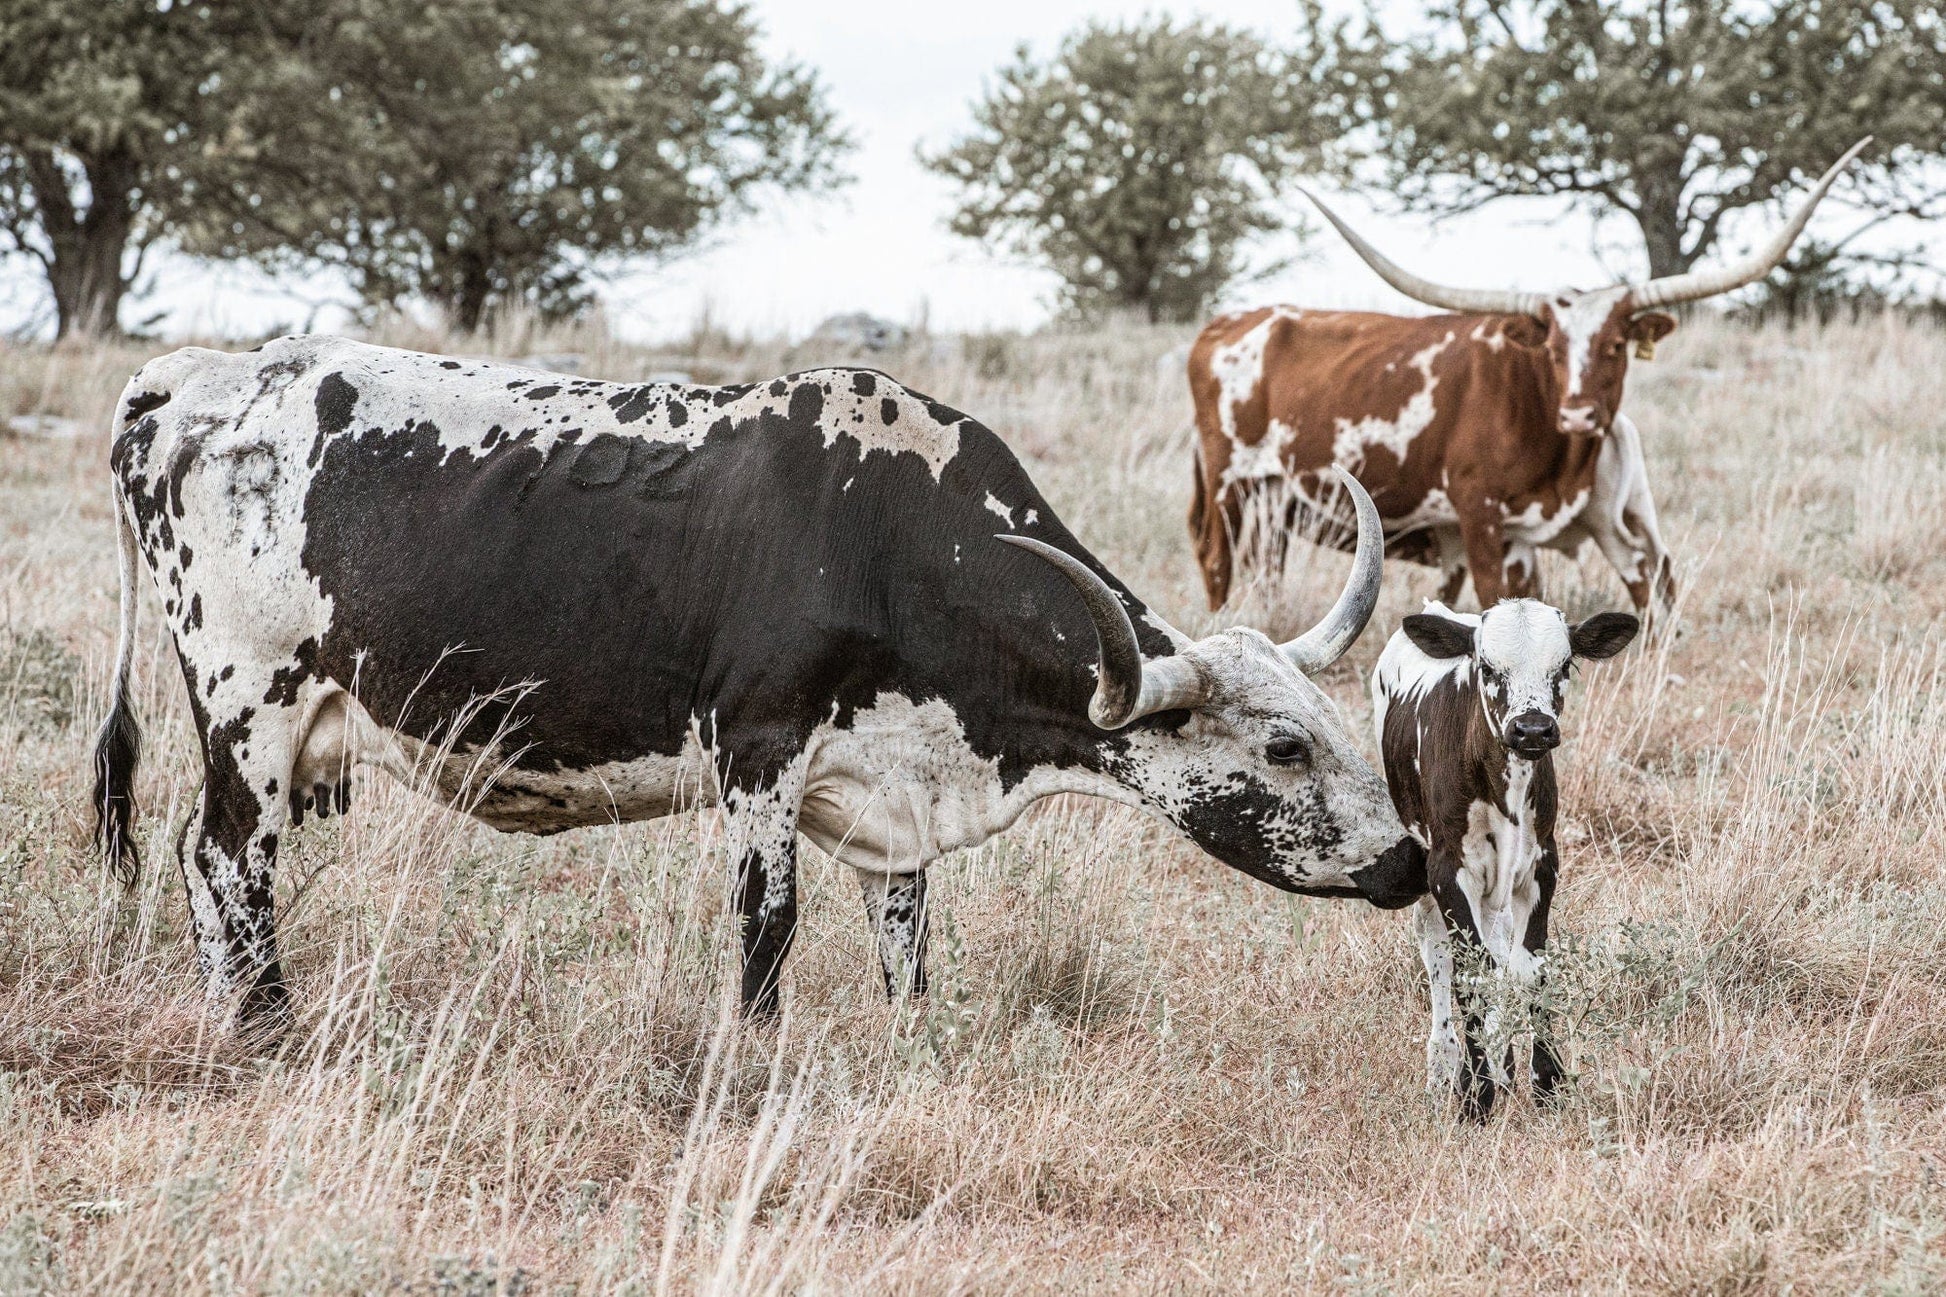 Teri James Photography Wall Art Paper Photo Print / 12 x 18 Inches Texas Longhorn Cattle - Cows and Calves